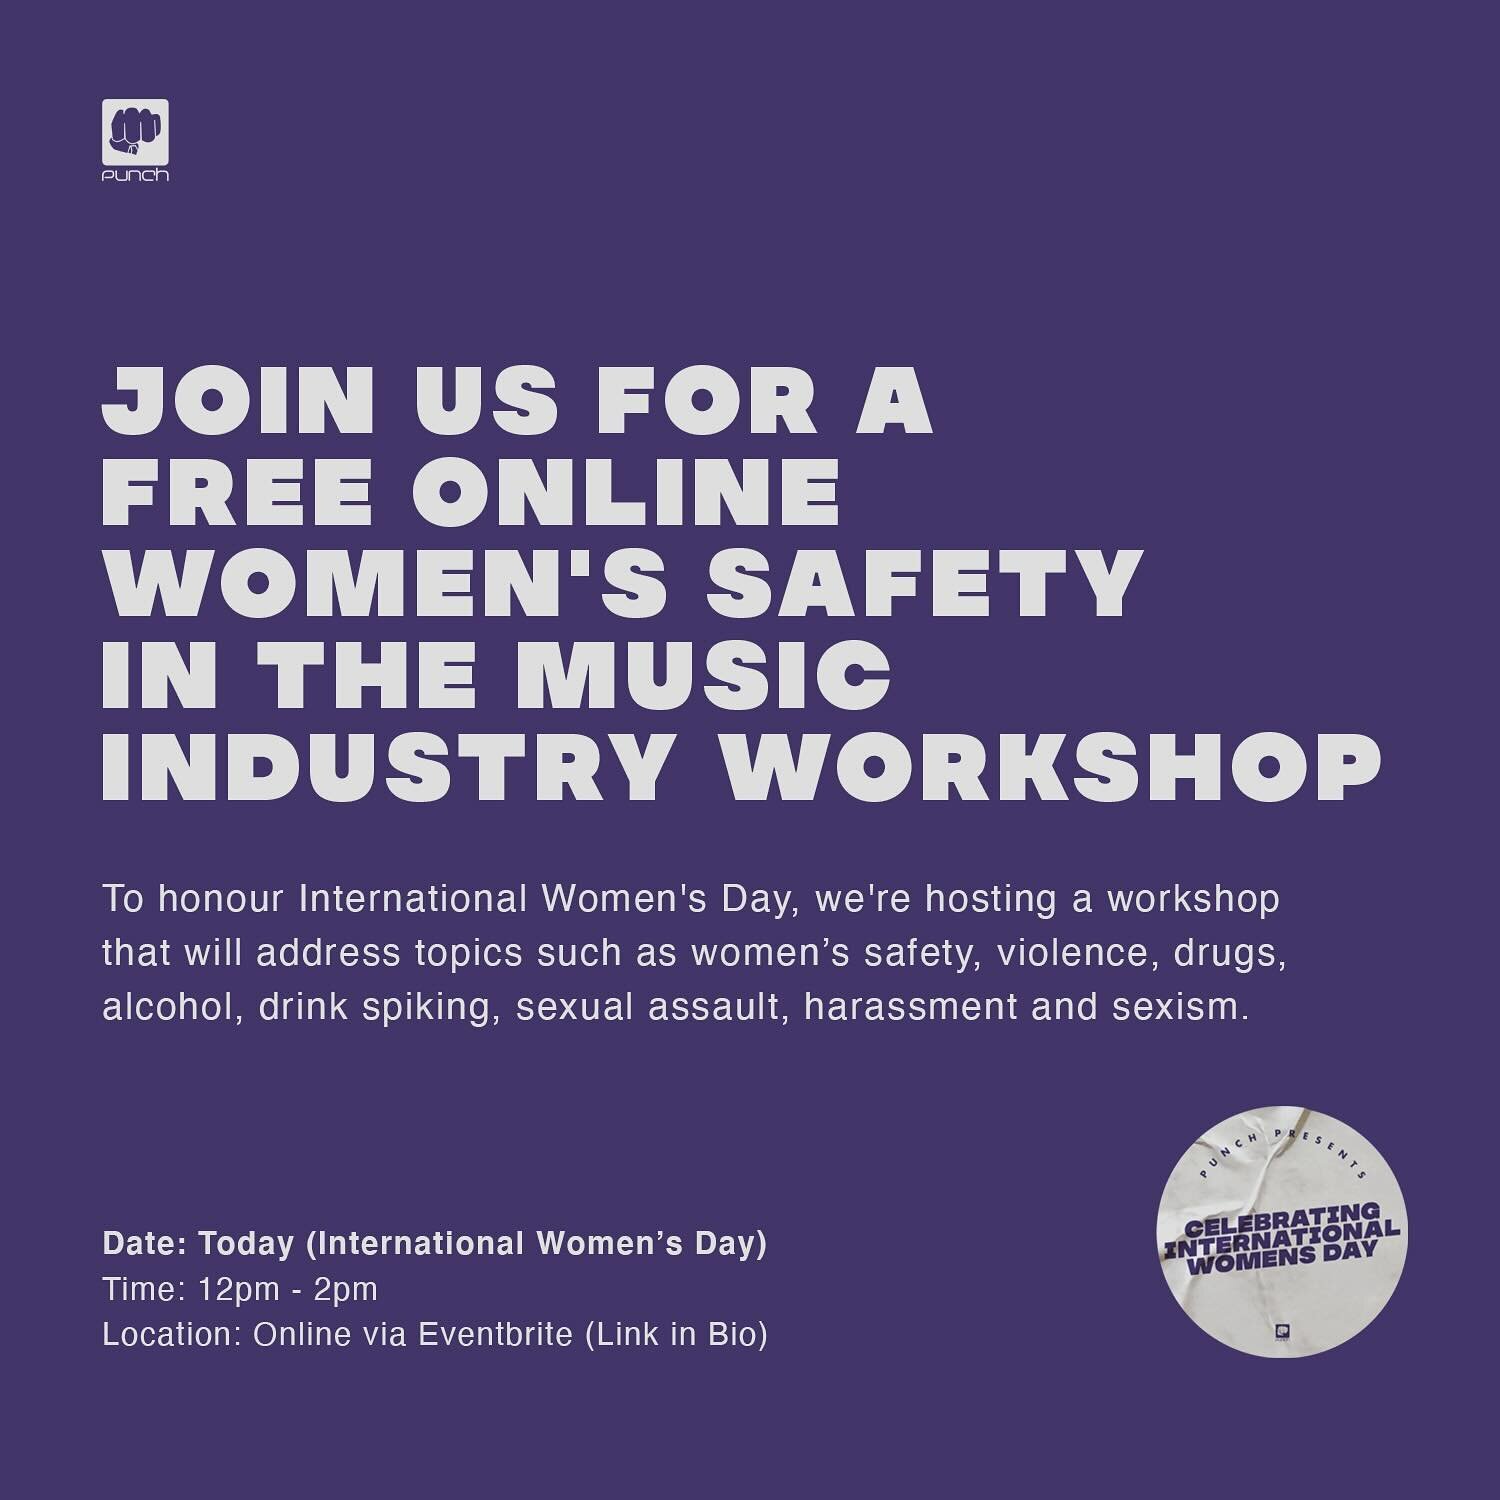 Happy International Women&rsquo;s Day🥳

We&rsquo;re offering free spots to an online workshop that addresses women&rsquo;s safety in music, it&rsquo;s a very important workshop for any woman trying to get into music or working in music currently.

T